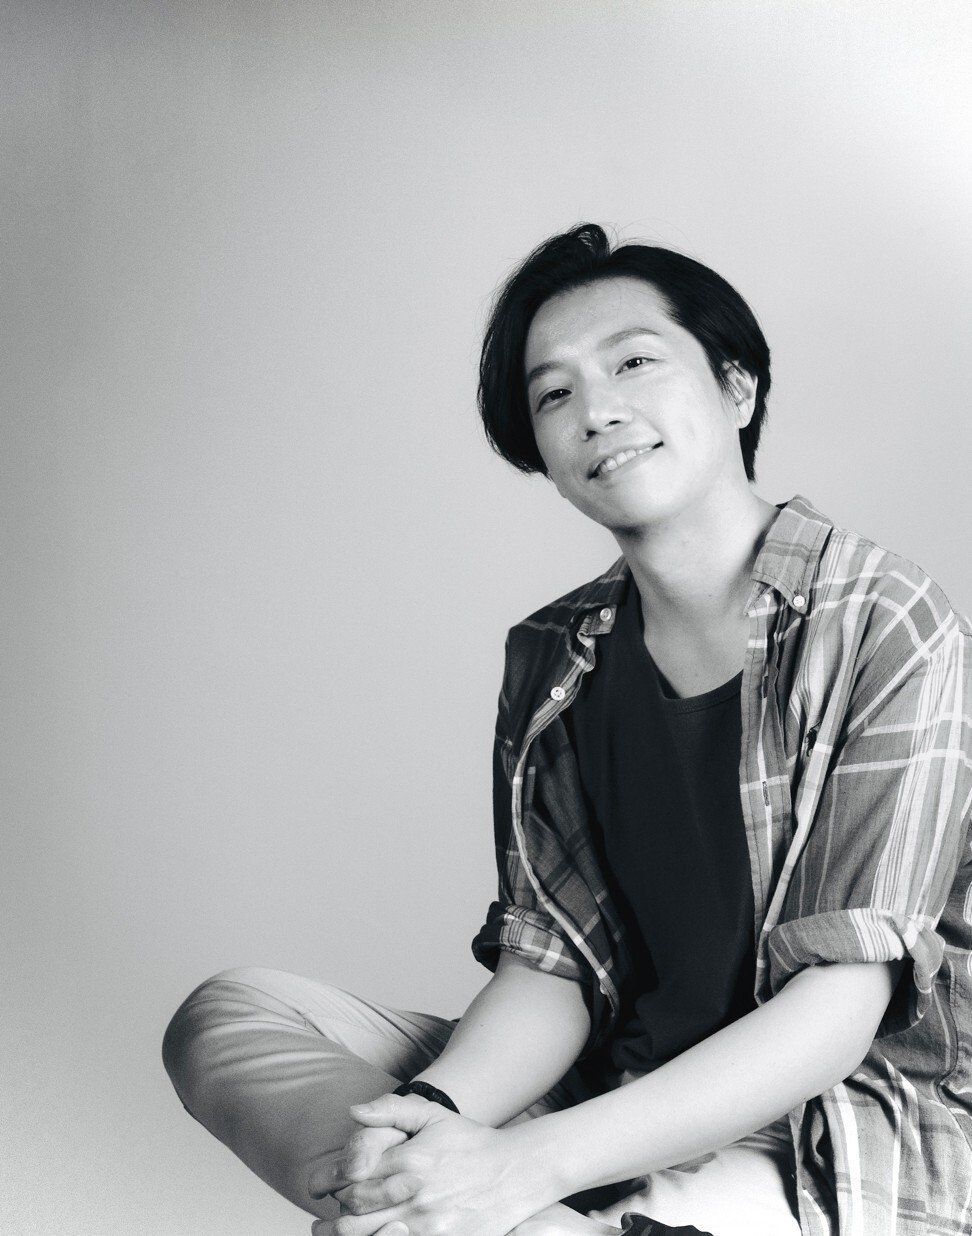 Hong Kong choreographer and director Ivanhoe Lam was first inspired to adapt Franz Kafka’s short story, ‘A Report to an Academy’, into an experiential dance show in 2010.